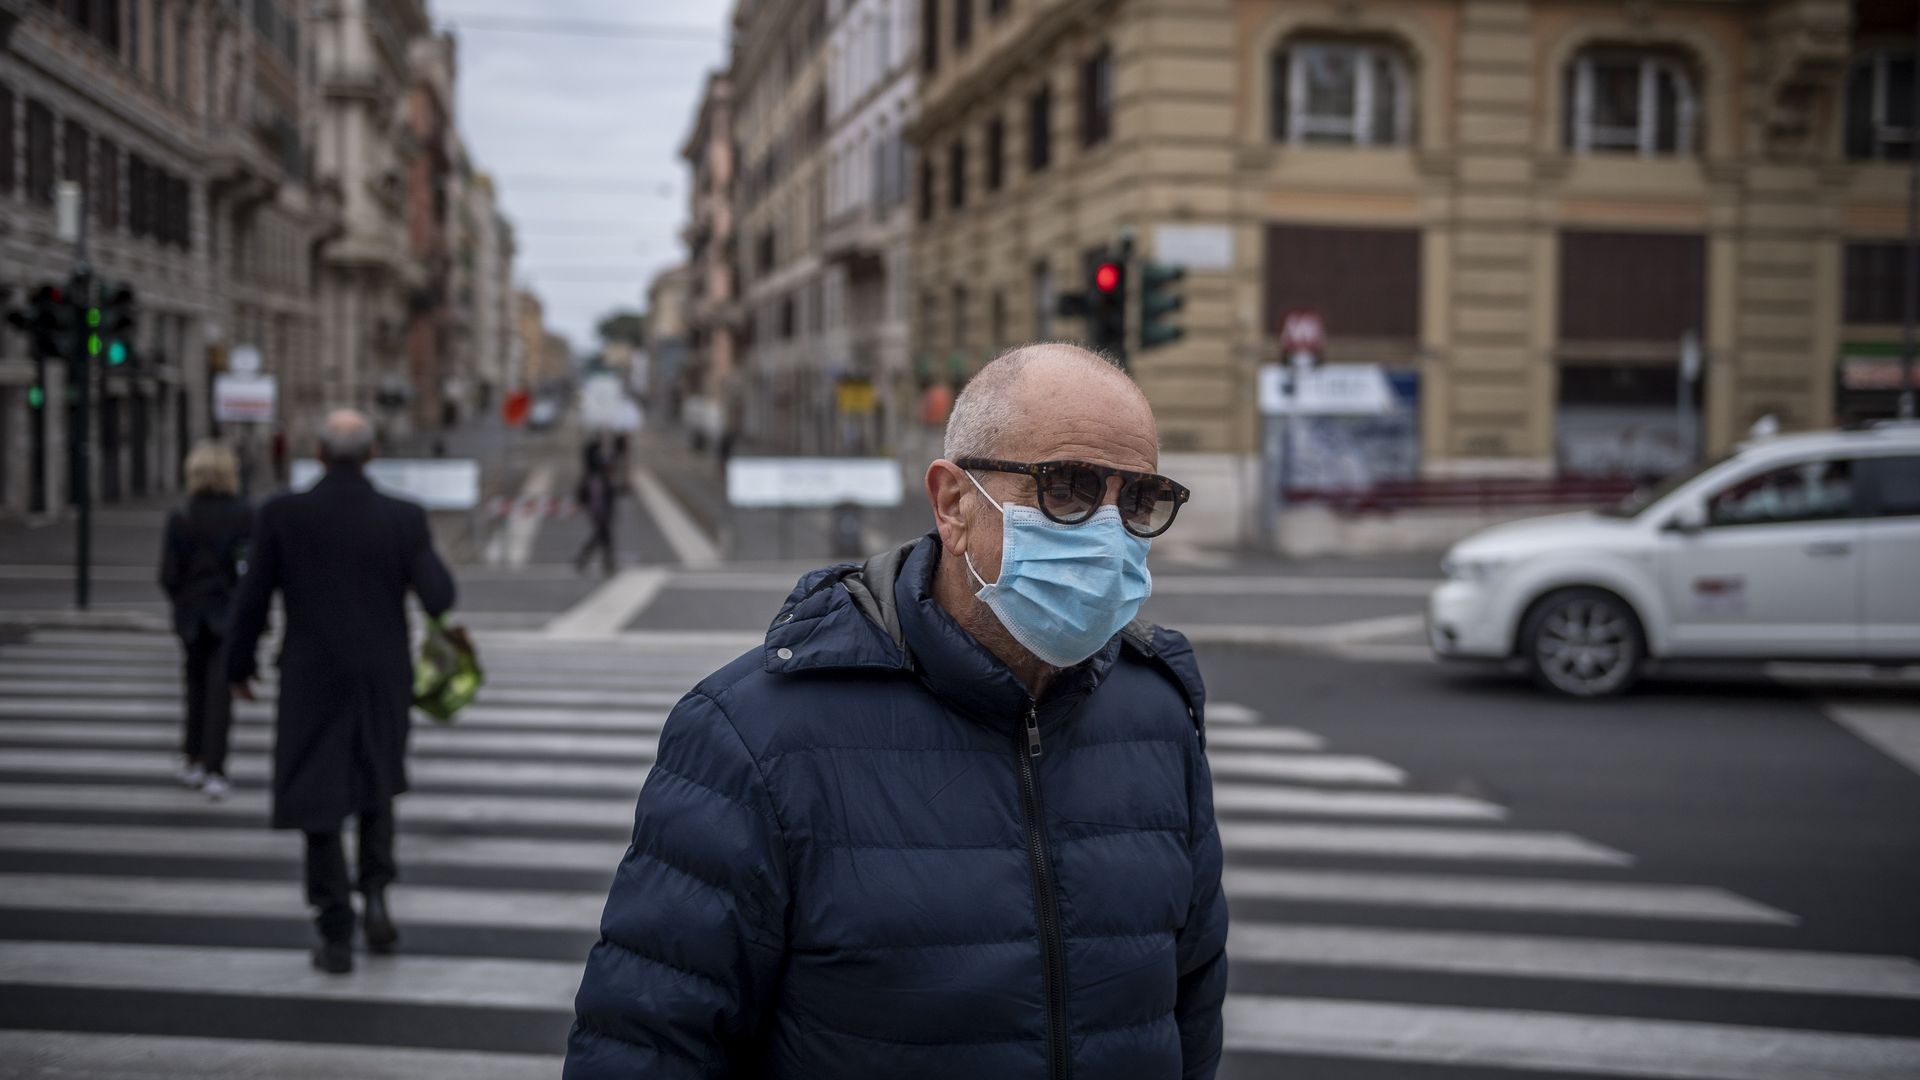 People wearing masks in Rome on March 14